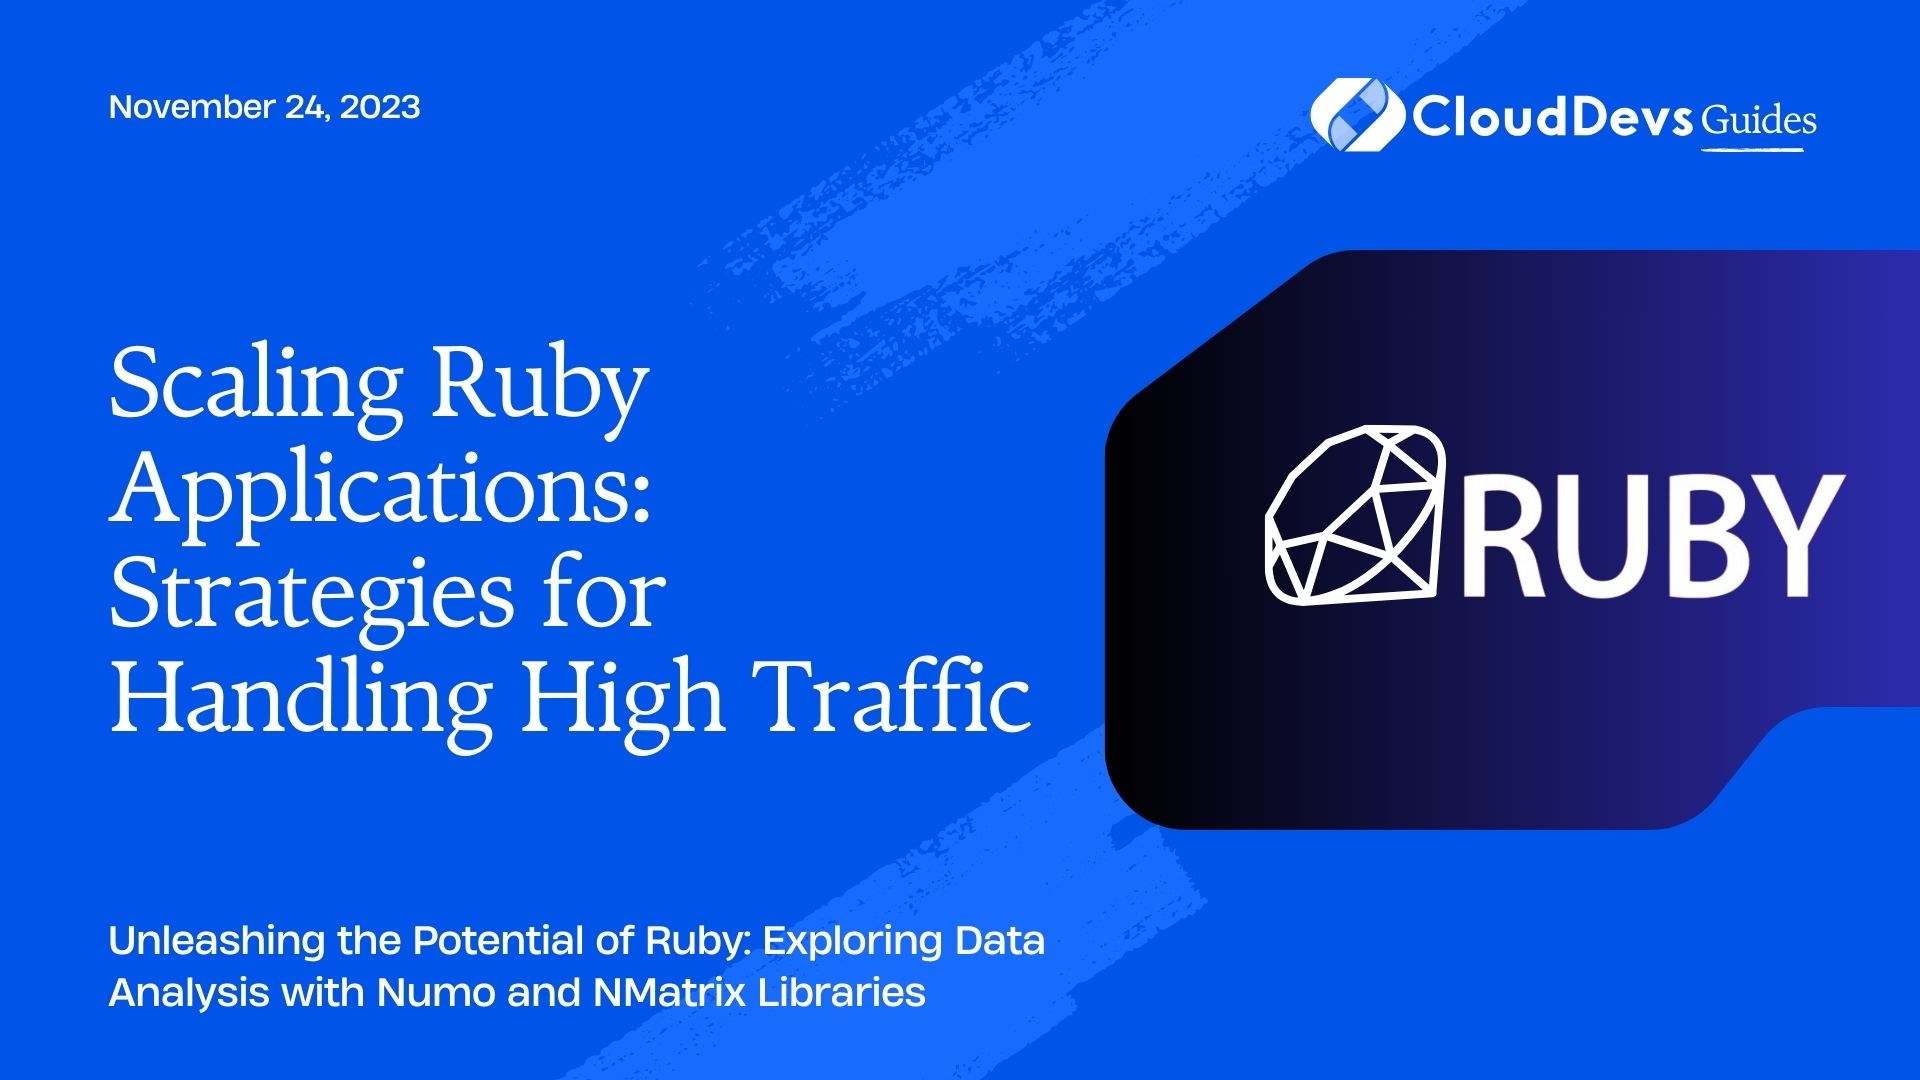 Scaling Ruby Applications: Strategies for Handling High Traffic